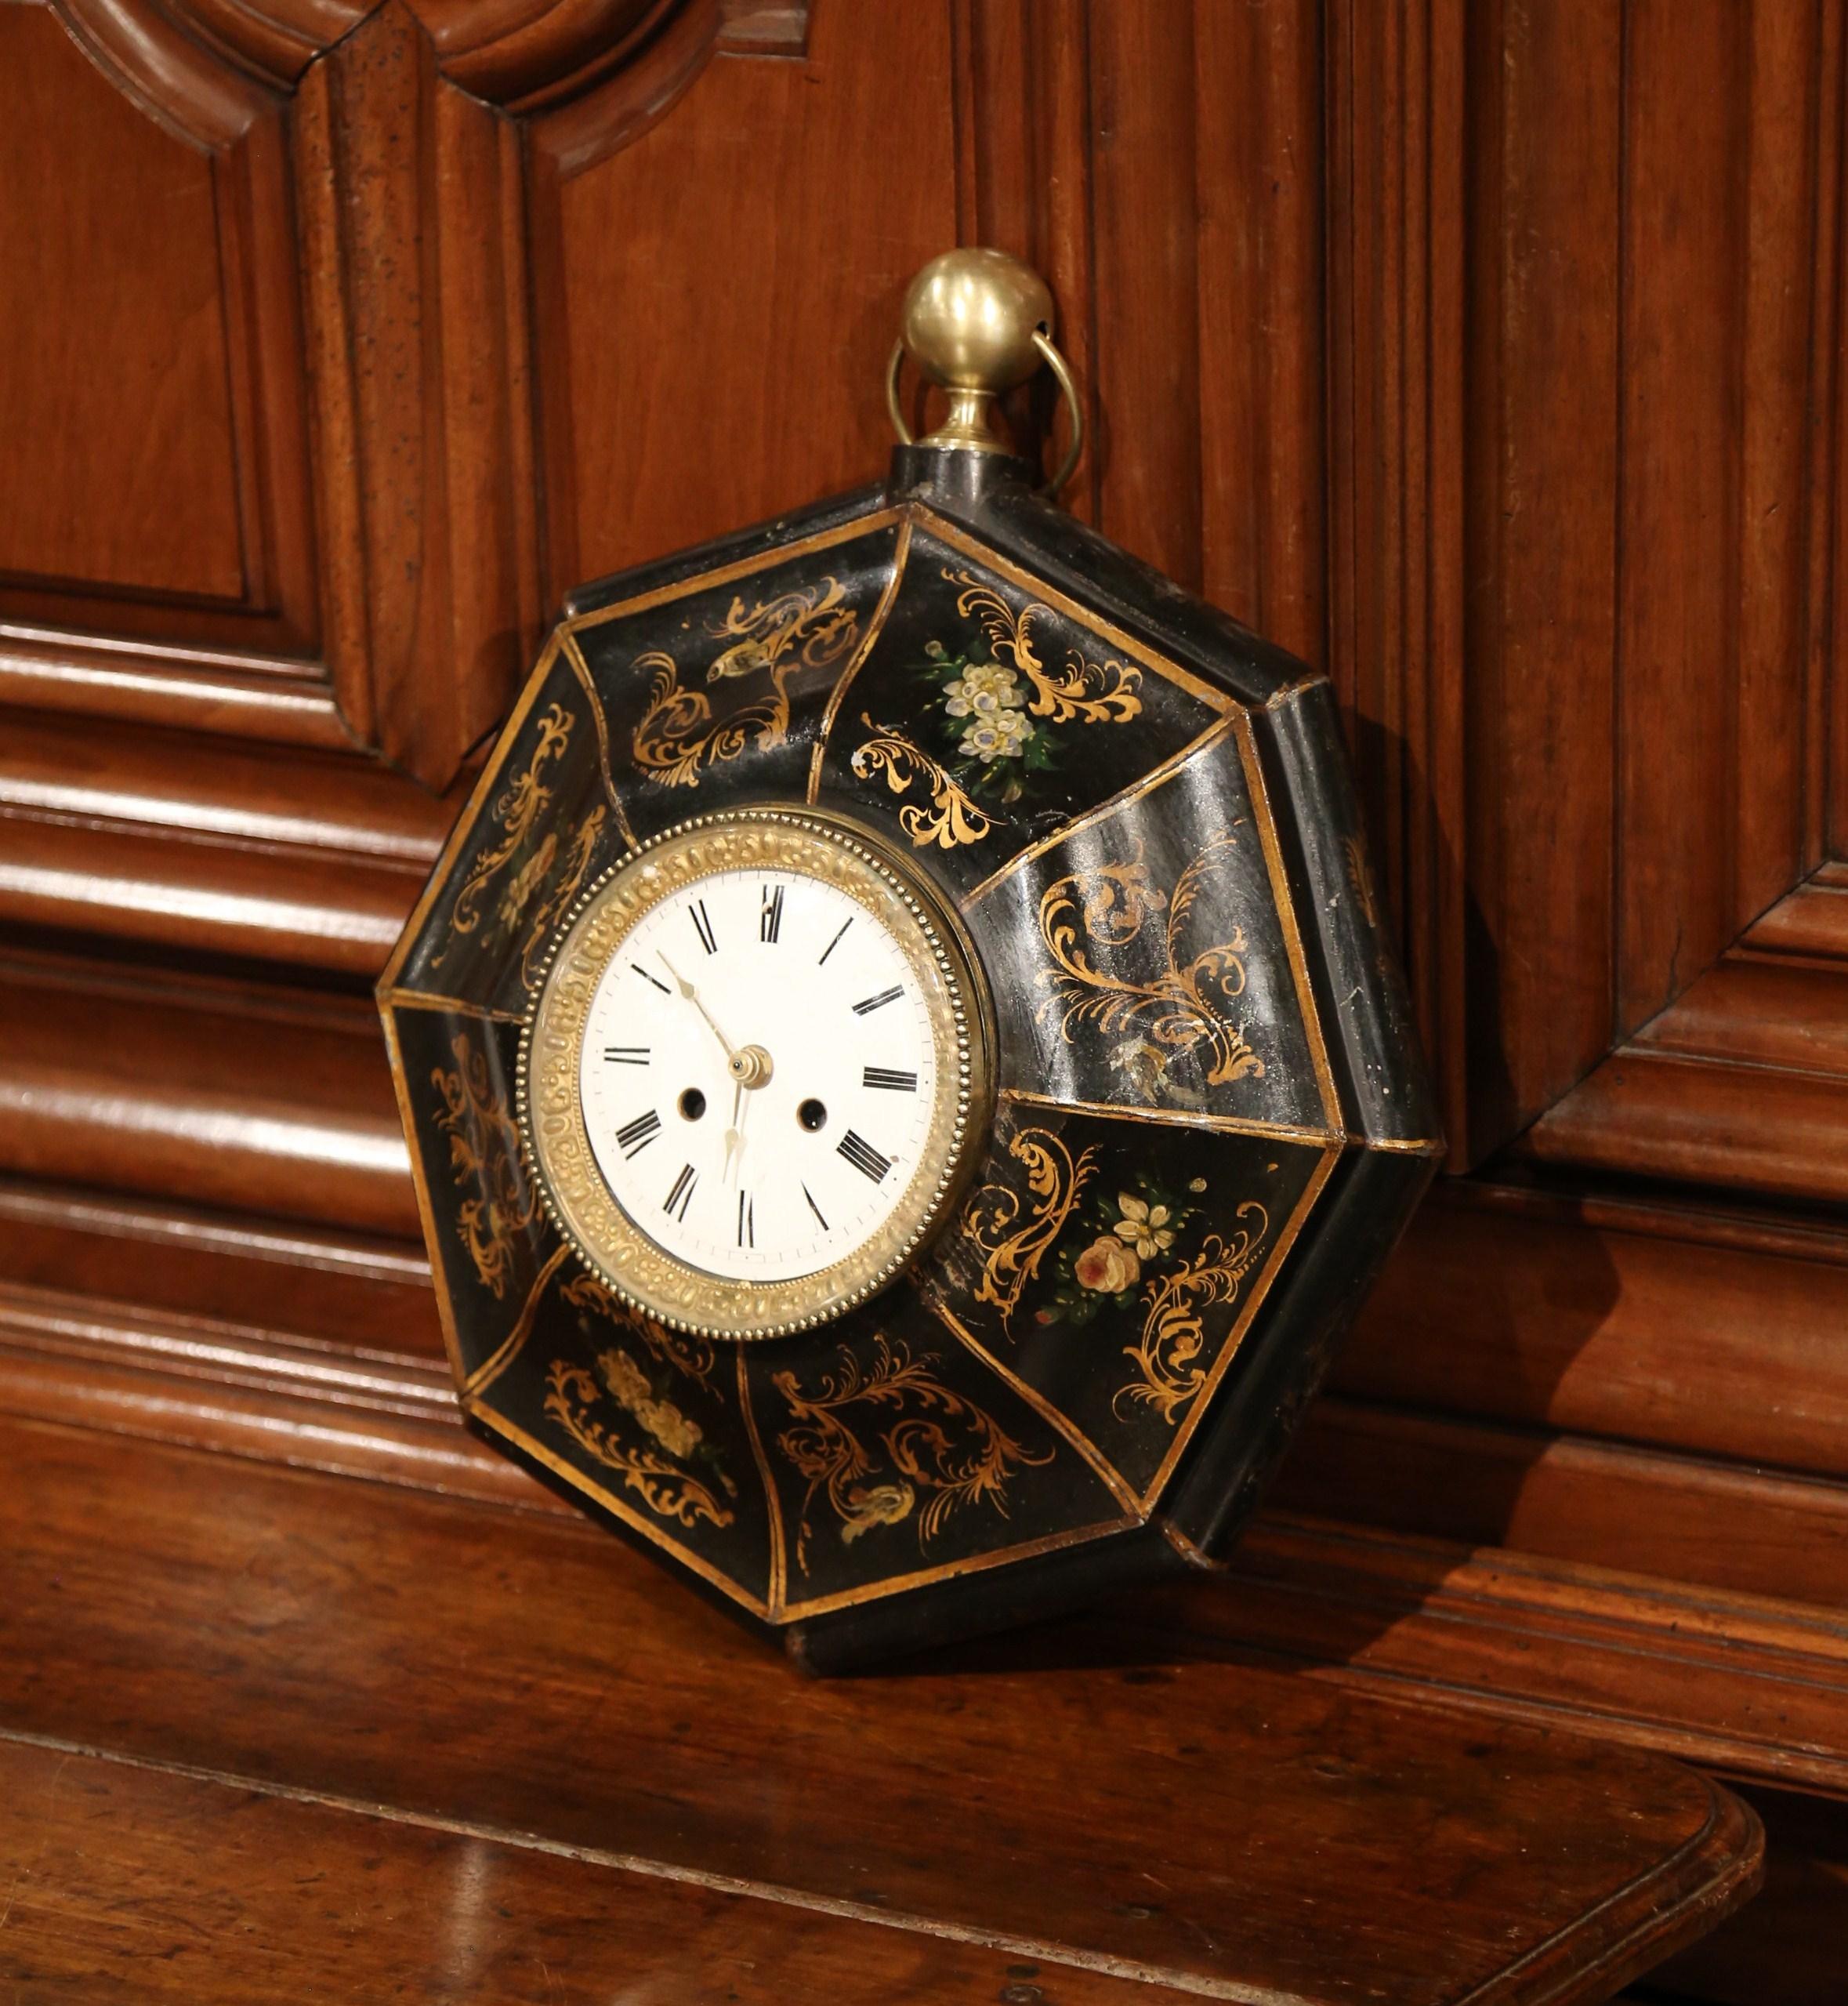 This feminine wall clock was created in France, circa 1870. Octagonal in shape, the antique tole clock features a round brass finial at the top. The mechanism inside the timepiece has been replaced with a quartz battery and keeps perfect time. The